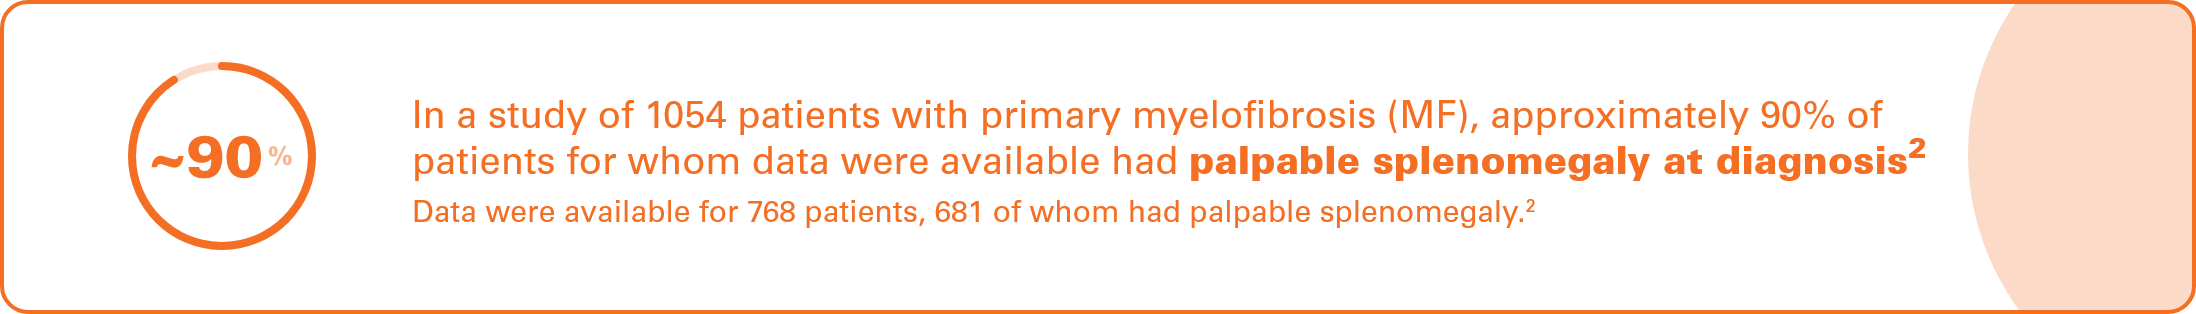 Image of text  that says In a study of 1054 patients with primary myelofibrosis (MF), approximately 90% (375/428) of patients for whom data were available had palpable splenomegaly at diagnosis. Data were available for 768 patients, 681 of whom had palpable splenomegaly.